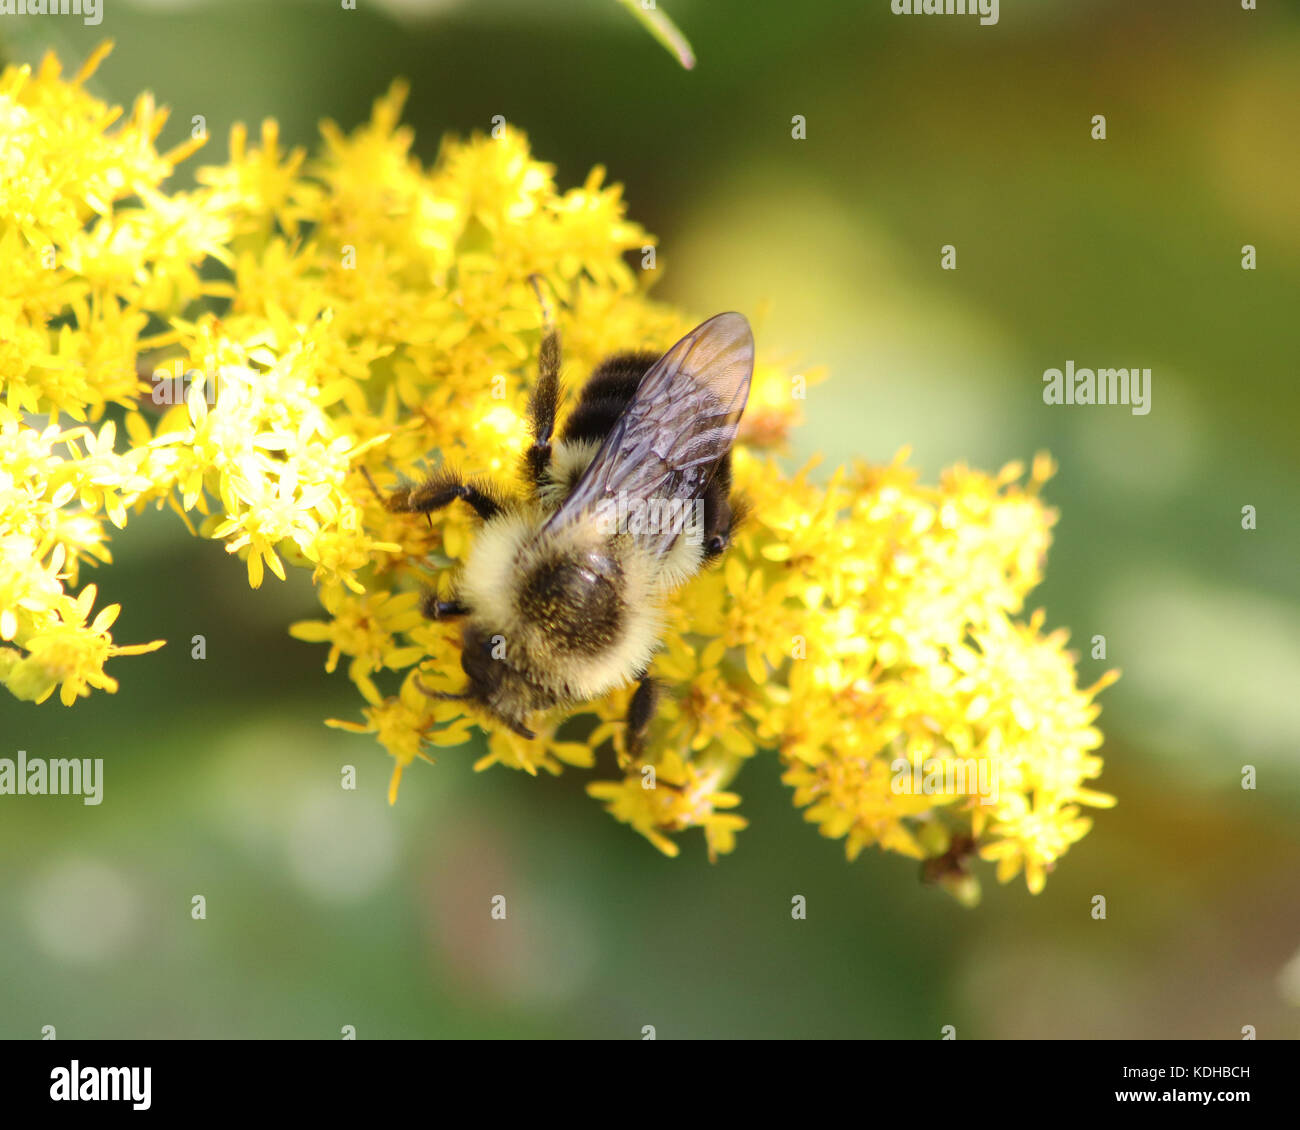 Solidago plant (goldenrod) with Bumble Bee closeup Stock Photo